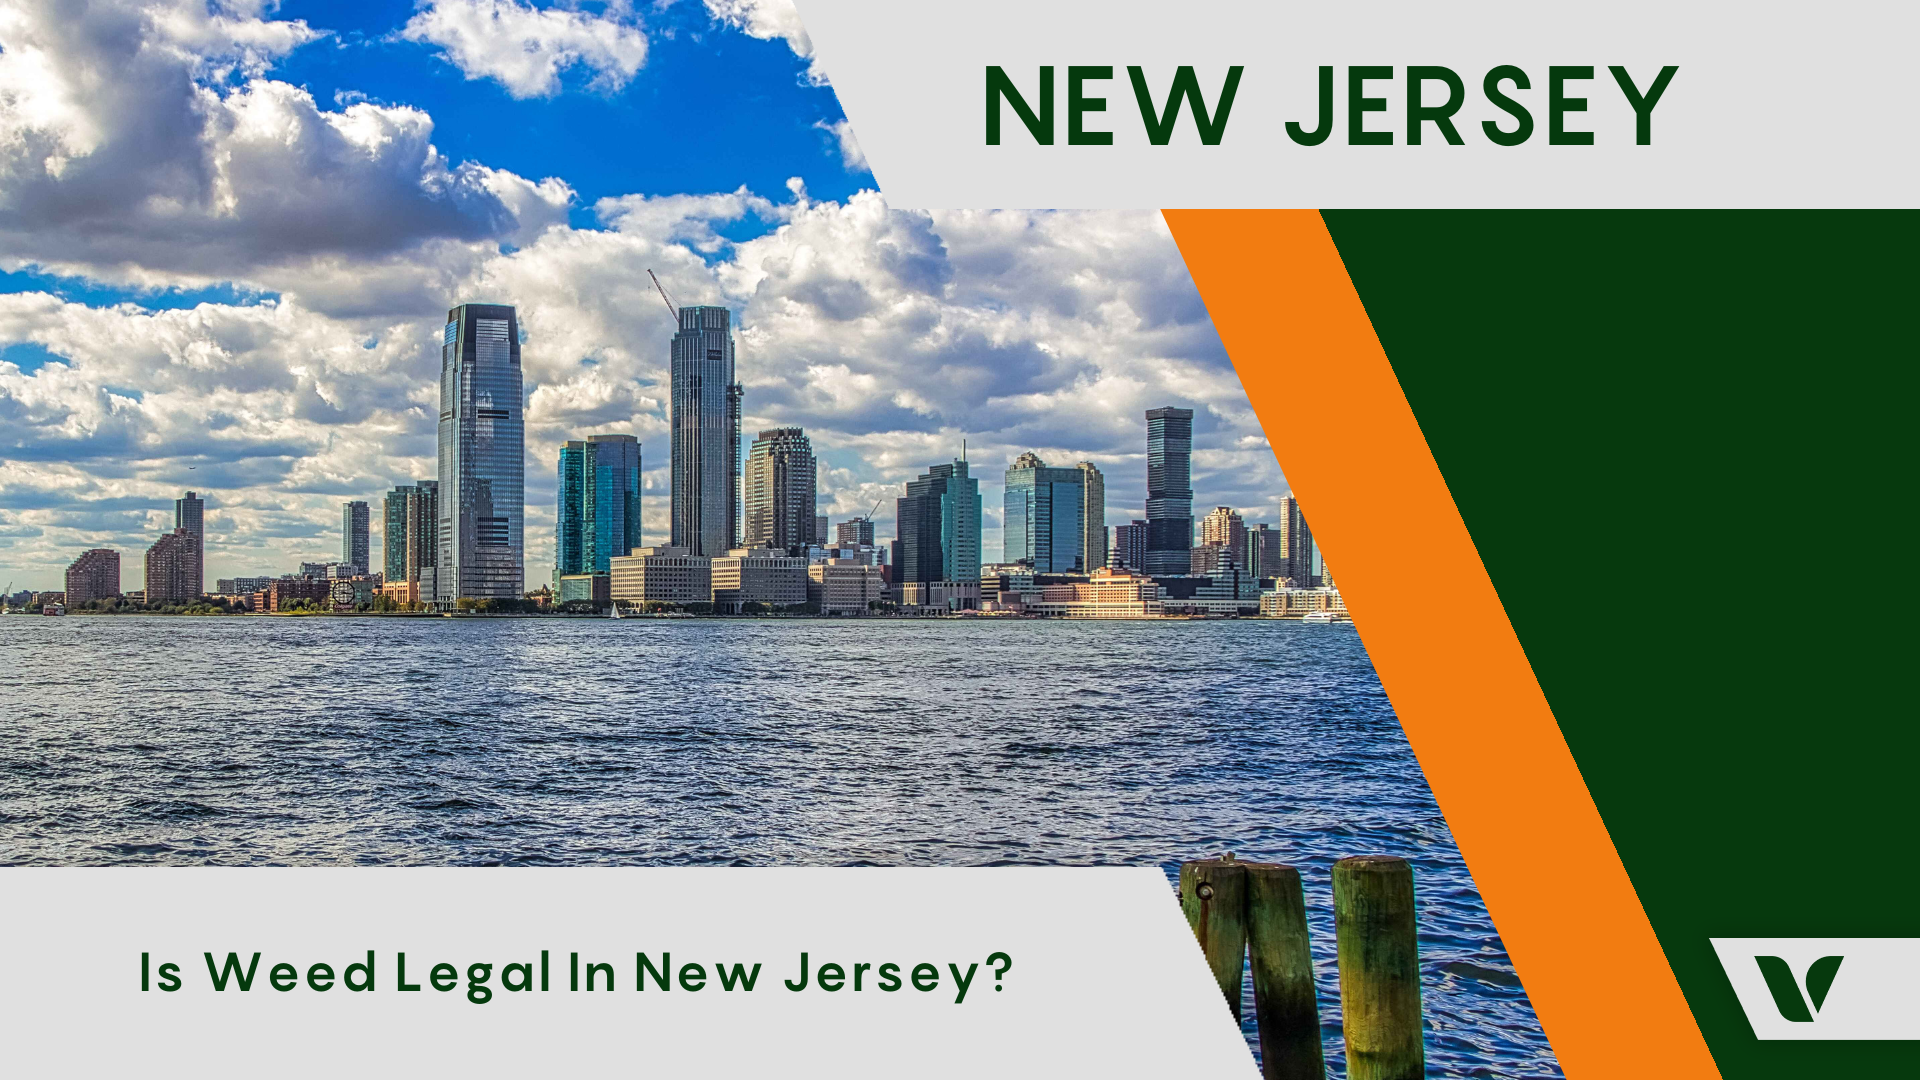 Is Weed Legal in New Jersey?